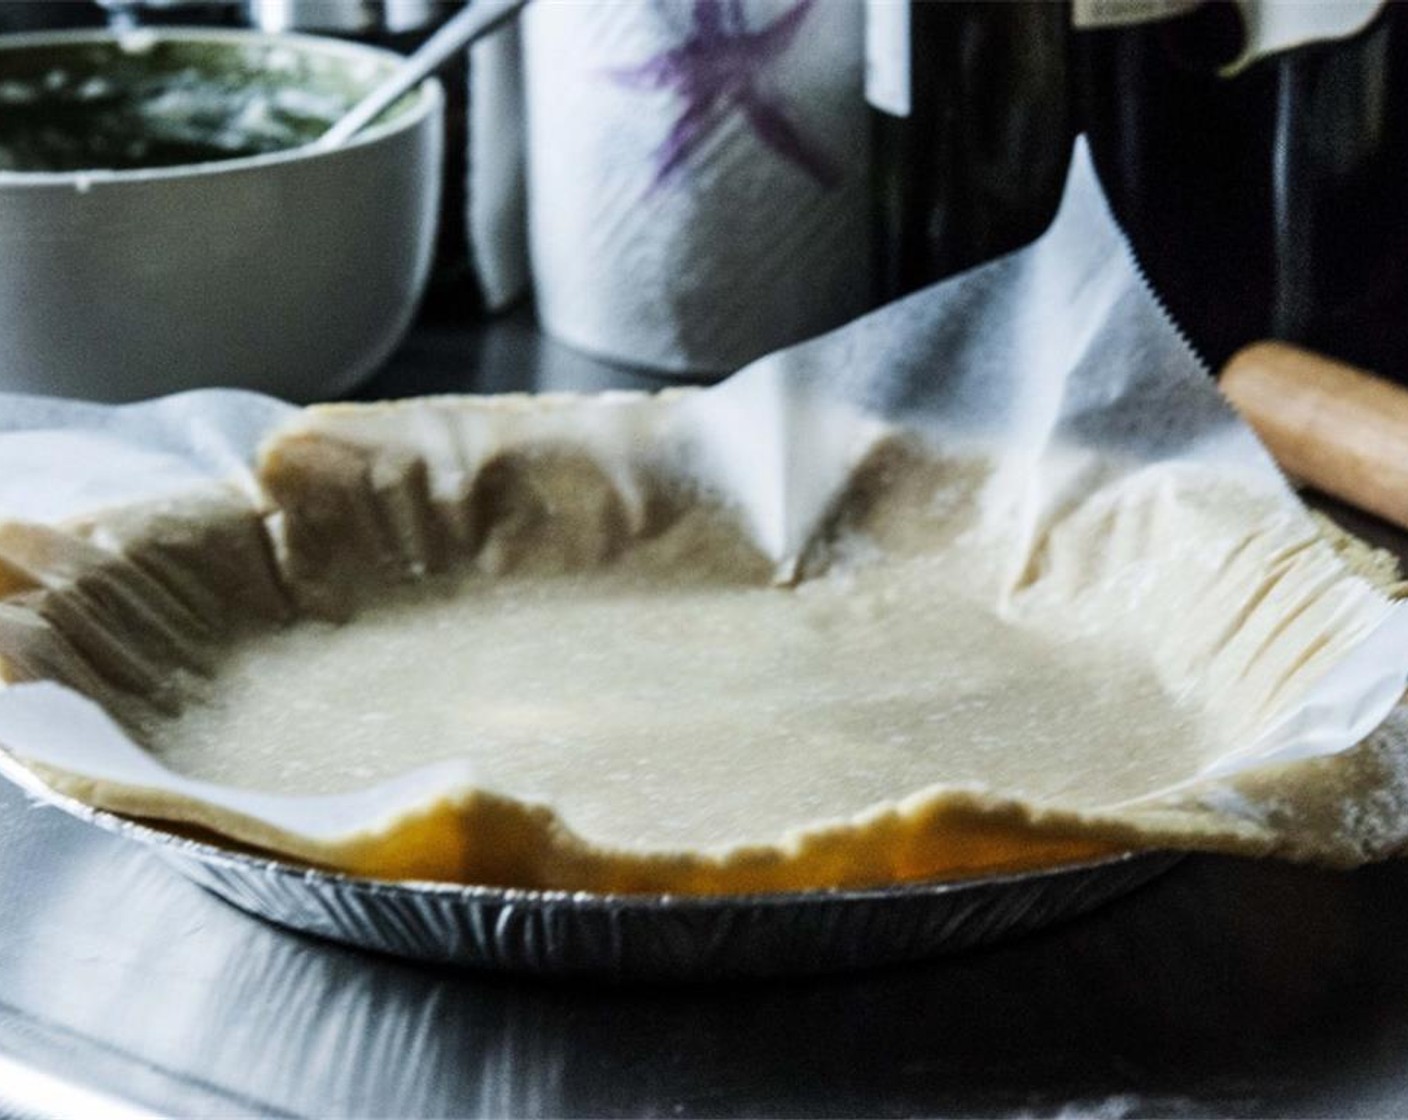 step 9 Heavily grease a pie pan with some butter, then lightly dust it with flour. Lay the dough in the pan, cover with some Baking Powder (1/2 tsp) parchment paper, and beans, and bake at 350 degrees F (180 degrees C) for about 20 minutes.